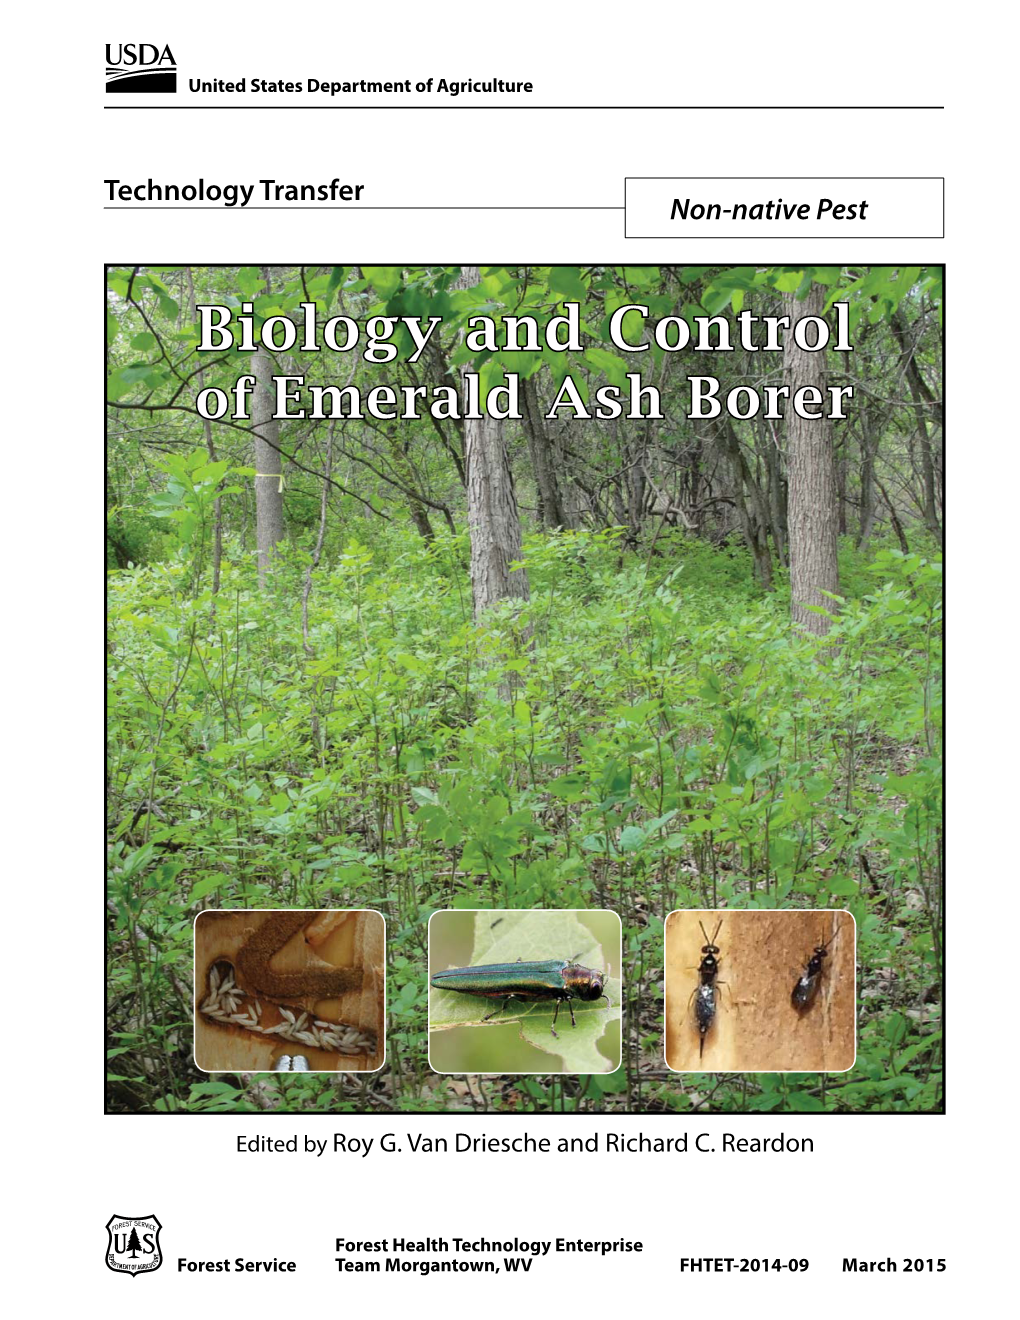 Ecological Impacts of Emerald Ash Borer